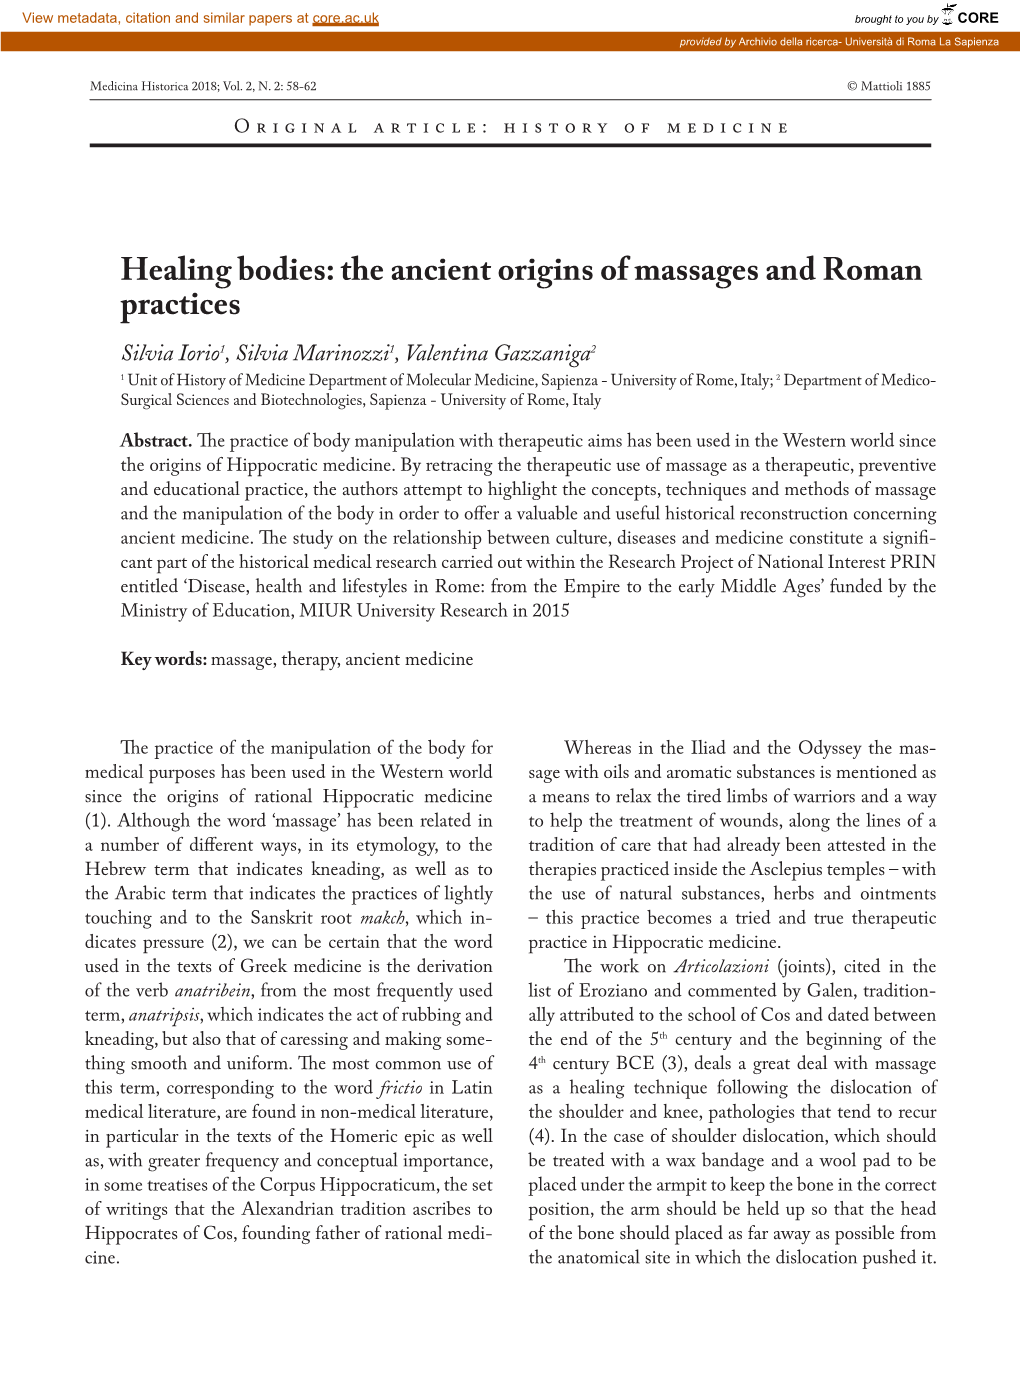 Healing Bodies: the Ancient Origins of Massages and Roman Practices